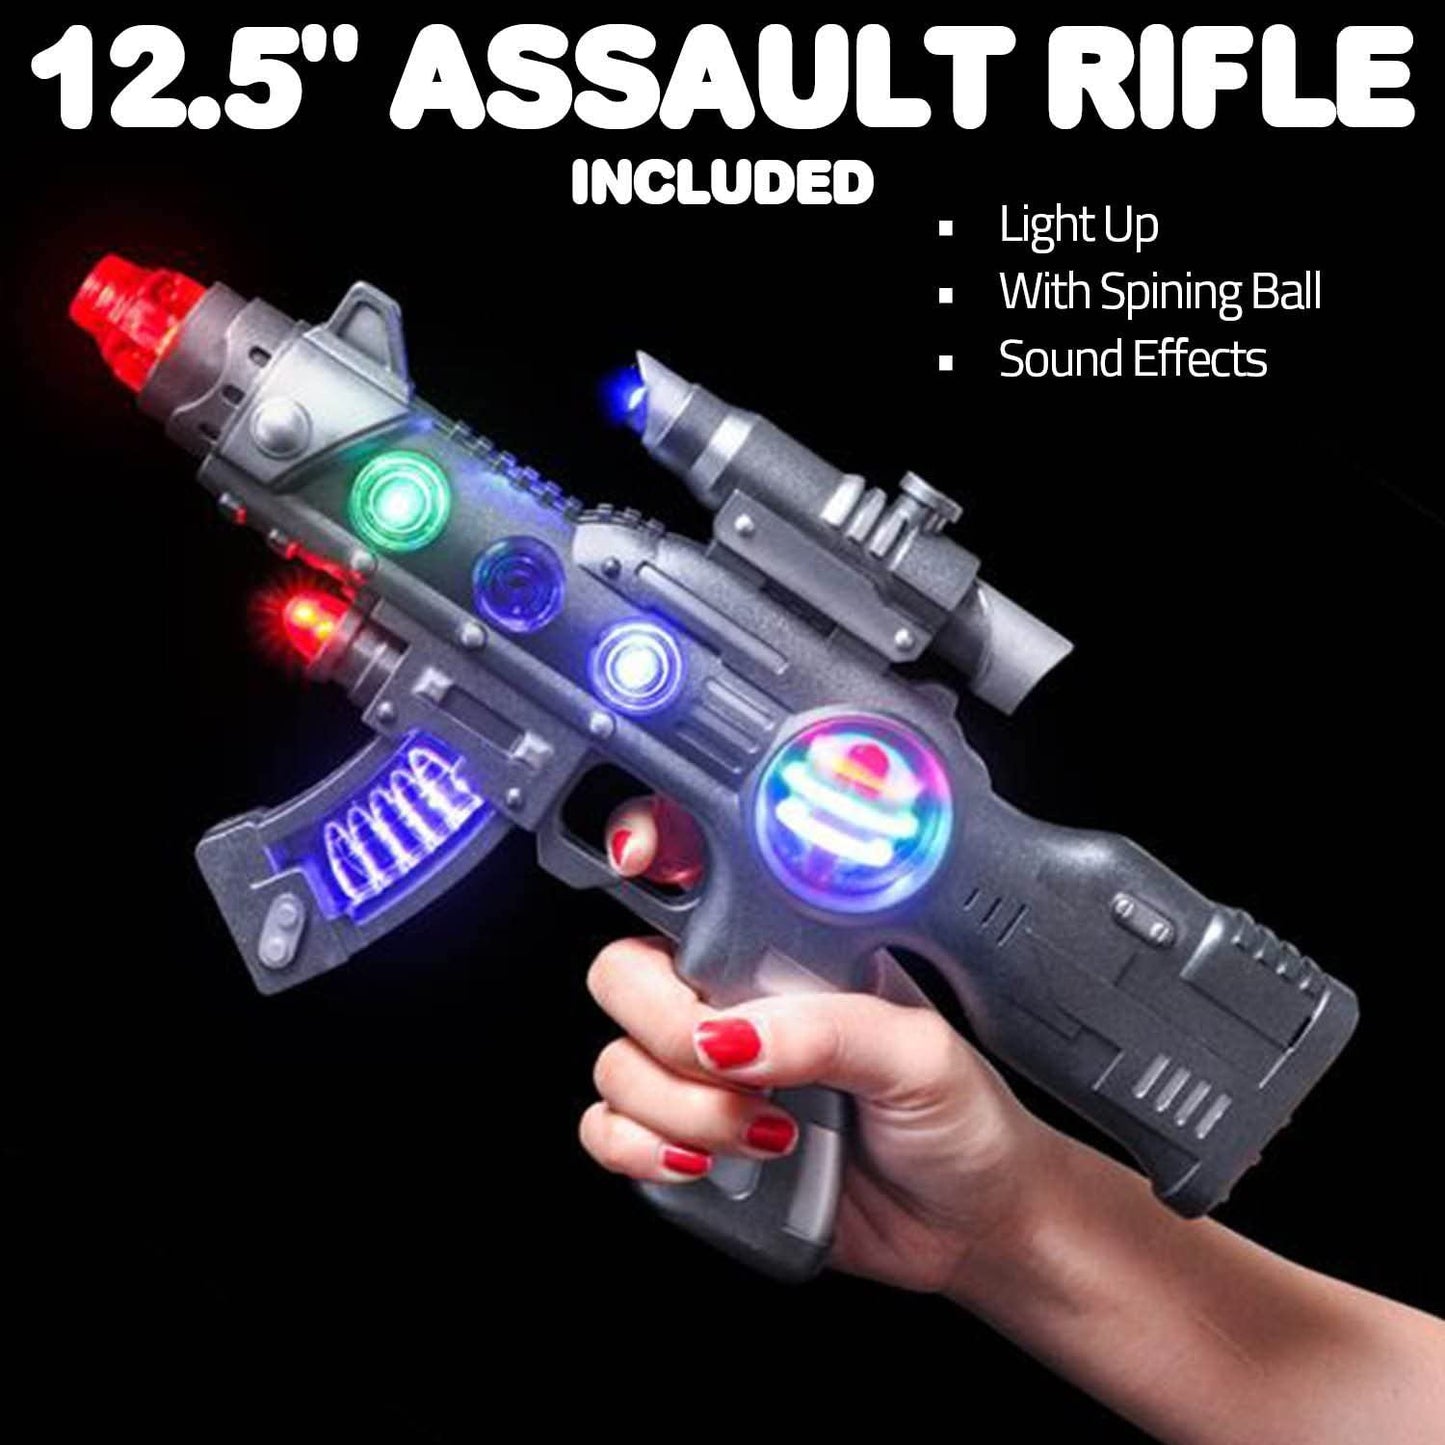 LED Light Up Toy Gun Set by Art Creativity - Includes 12.5 Inch Assault Rifle, 9 Inch Hand Pistol and Batteries - Super Ray Gun Blasters with Colorful Flashing LEDs and Sound - Cool Play Toy for Kids